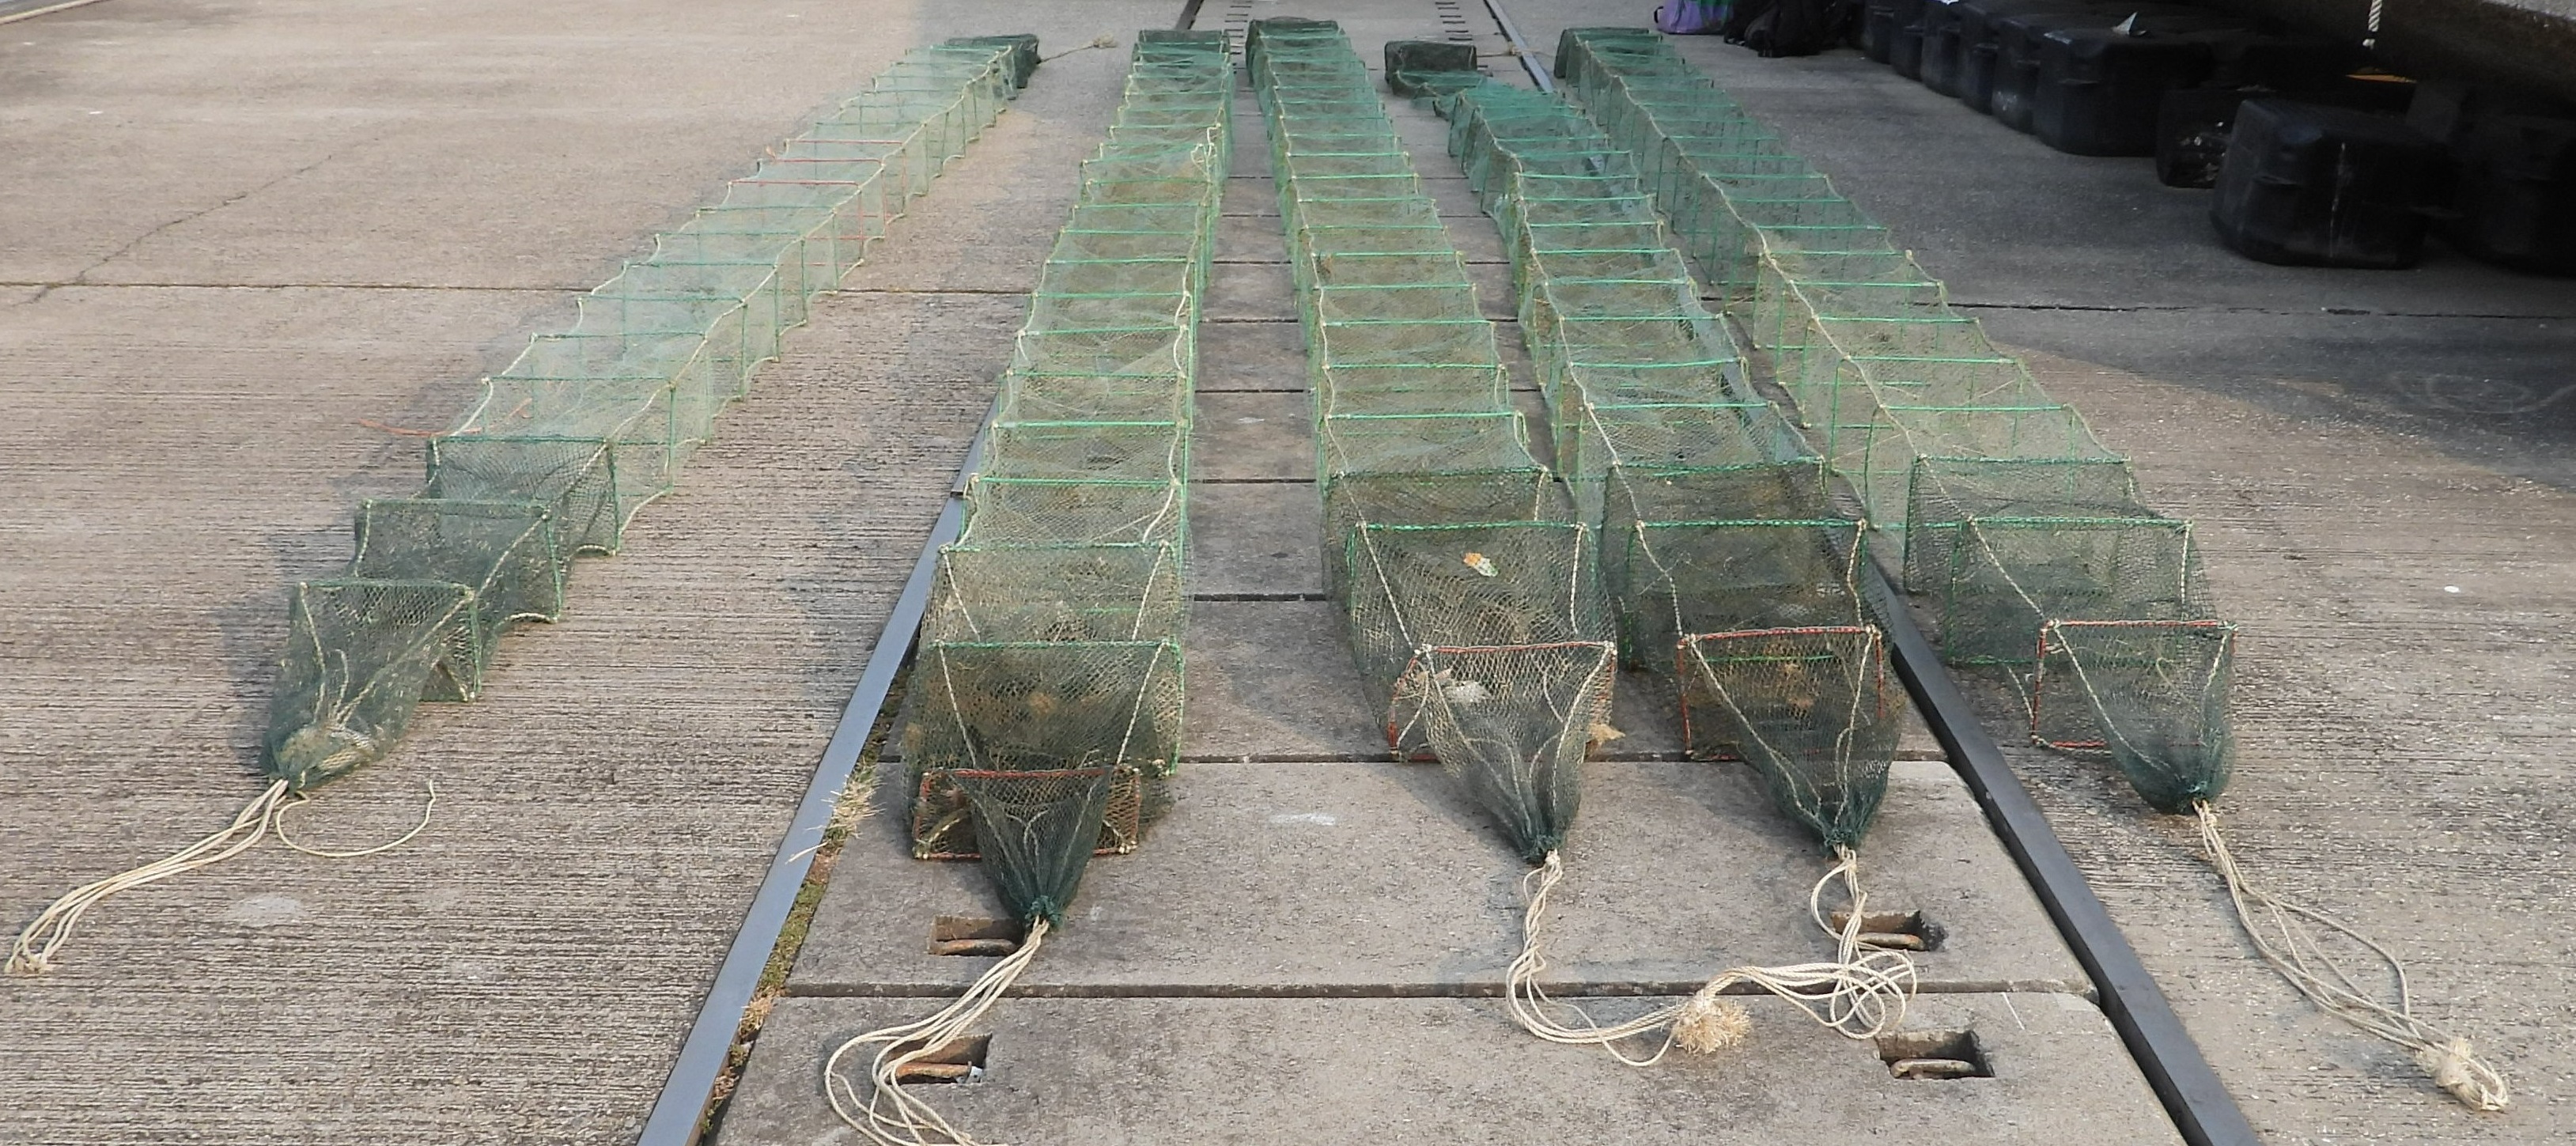 Five persons using snake cages for fishing sentenced (2)